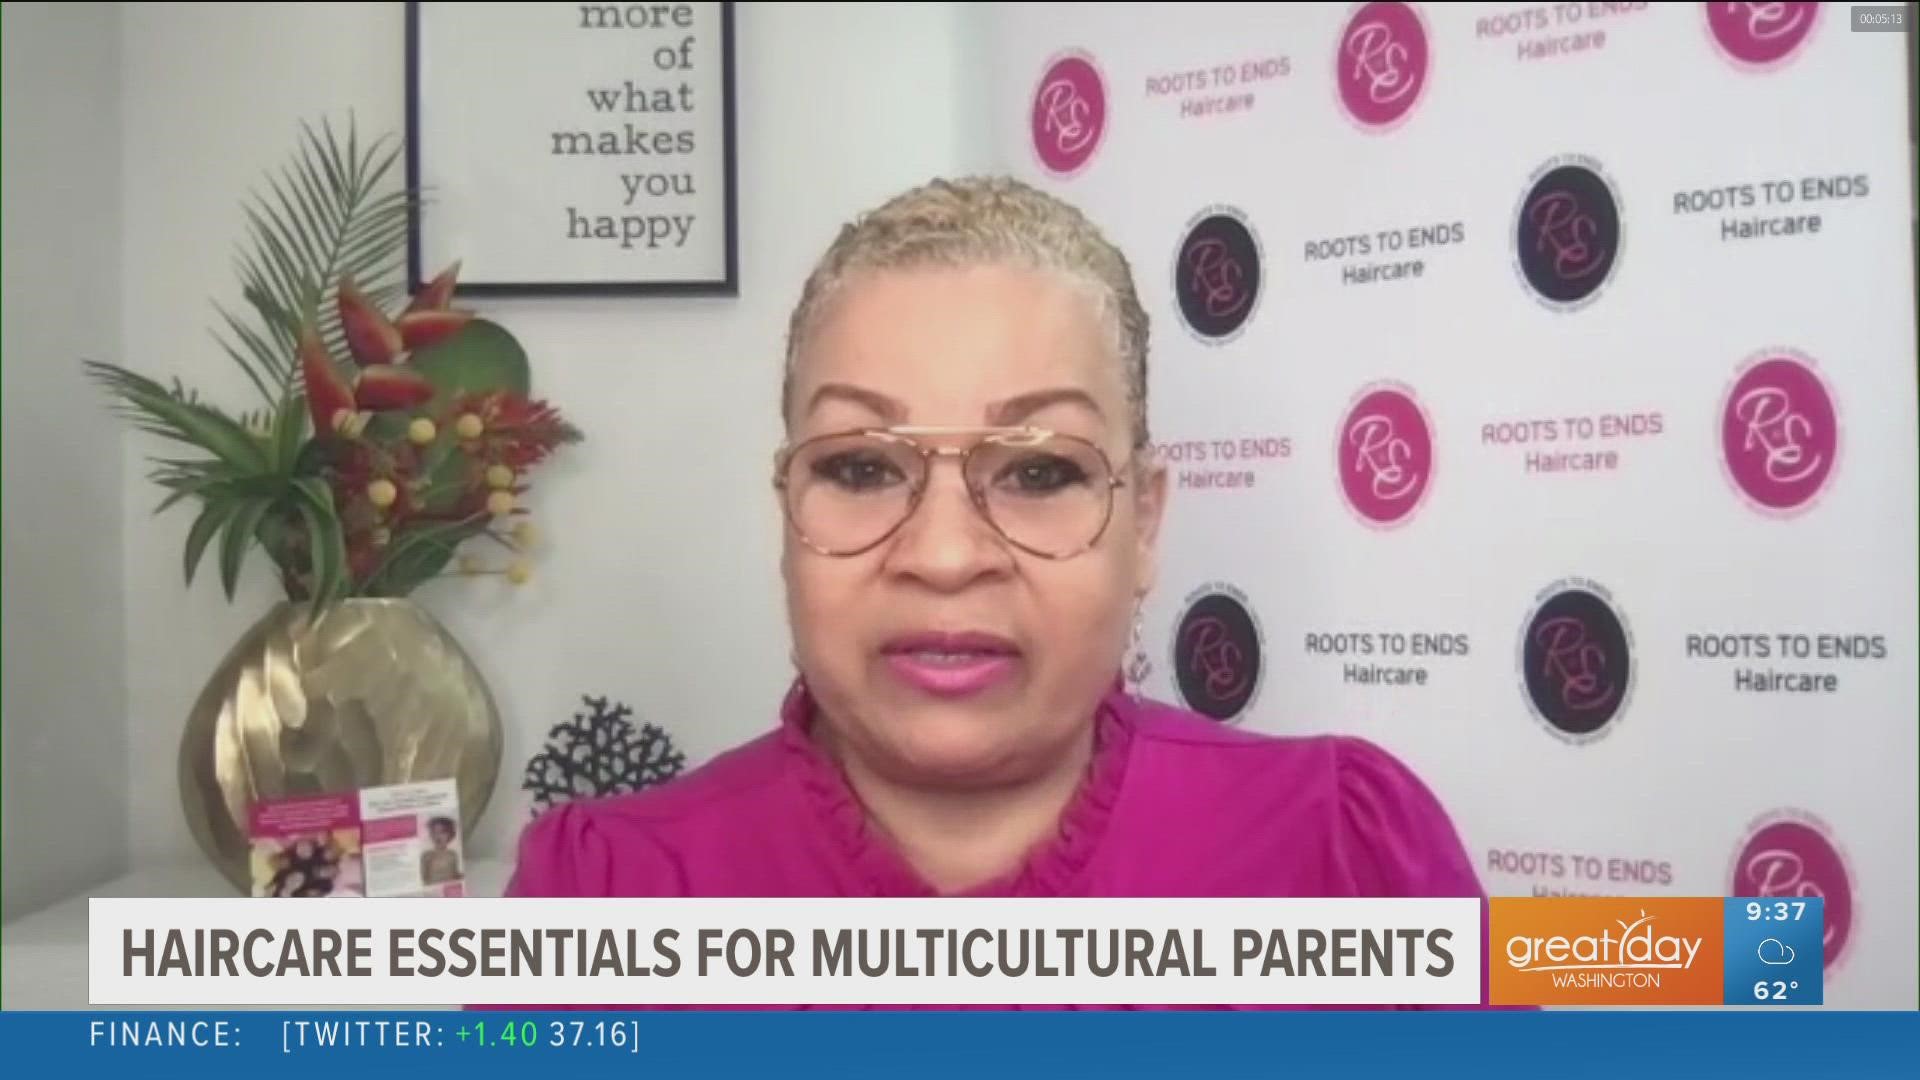 Hairstylist Lynne Wooden shares tips on how to care for children's hair in multicultural families. Wooden is also hosting a workshop called "Roots to Ends Haircare".